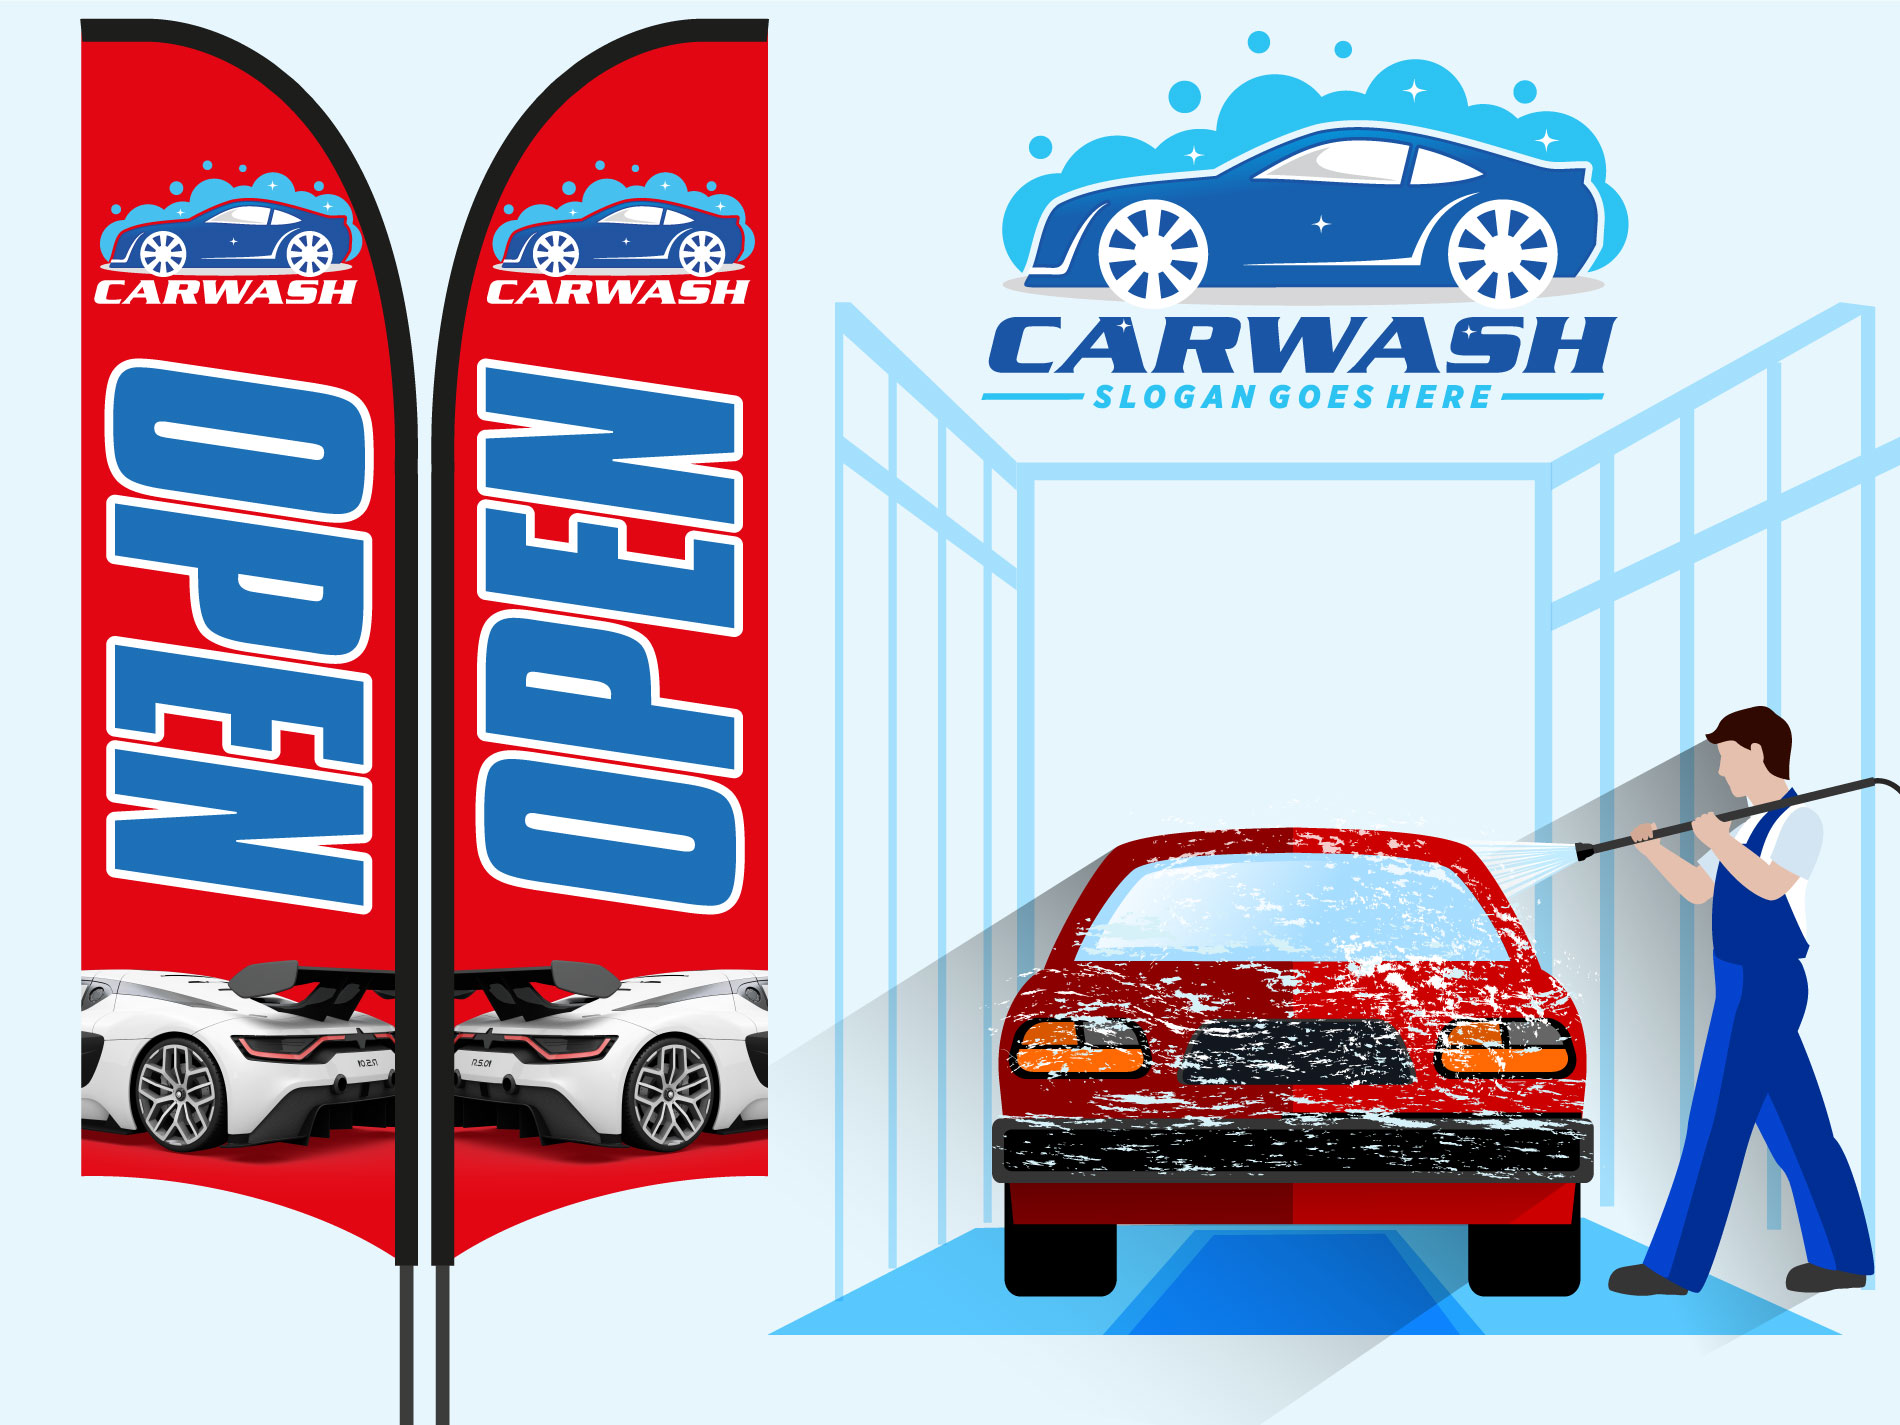 CAR WASH flag 3'x5' banner store concession business advertising RED WHITE BLUE 